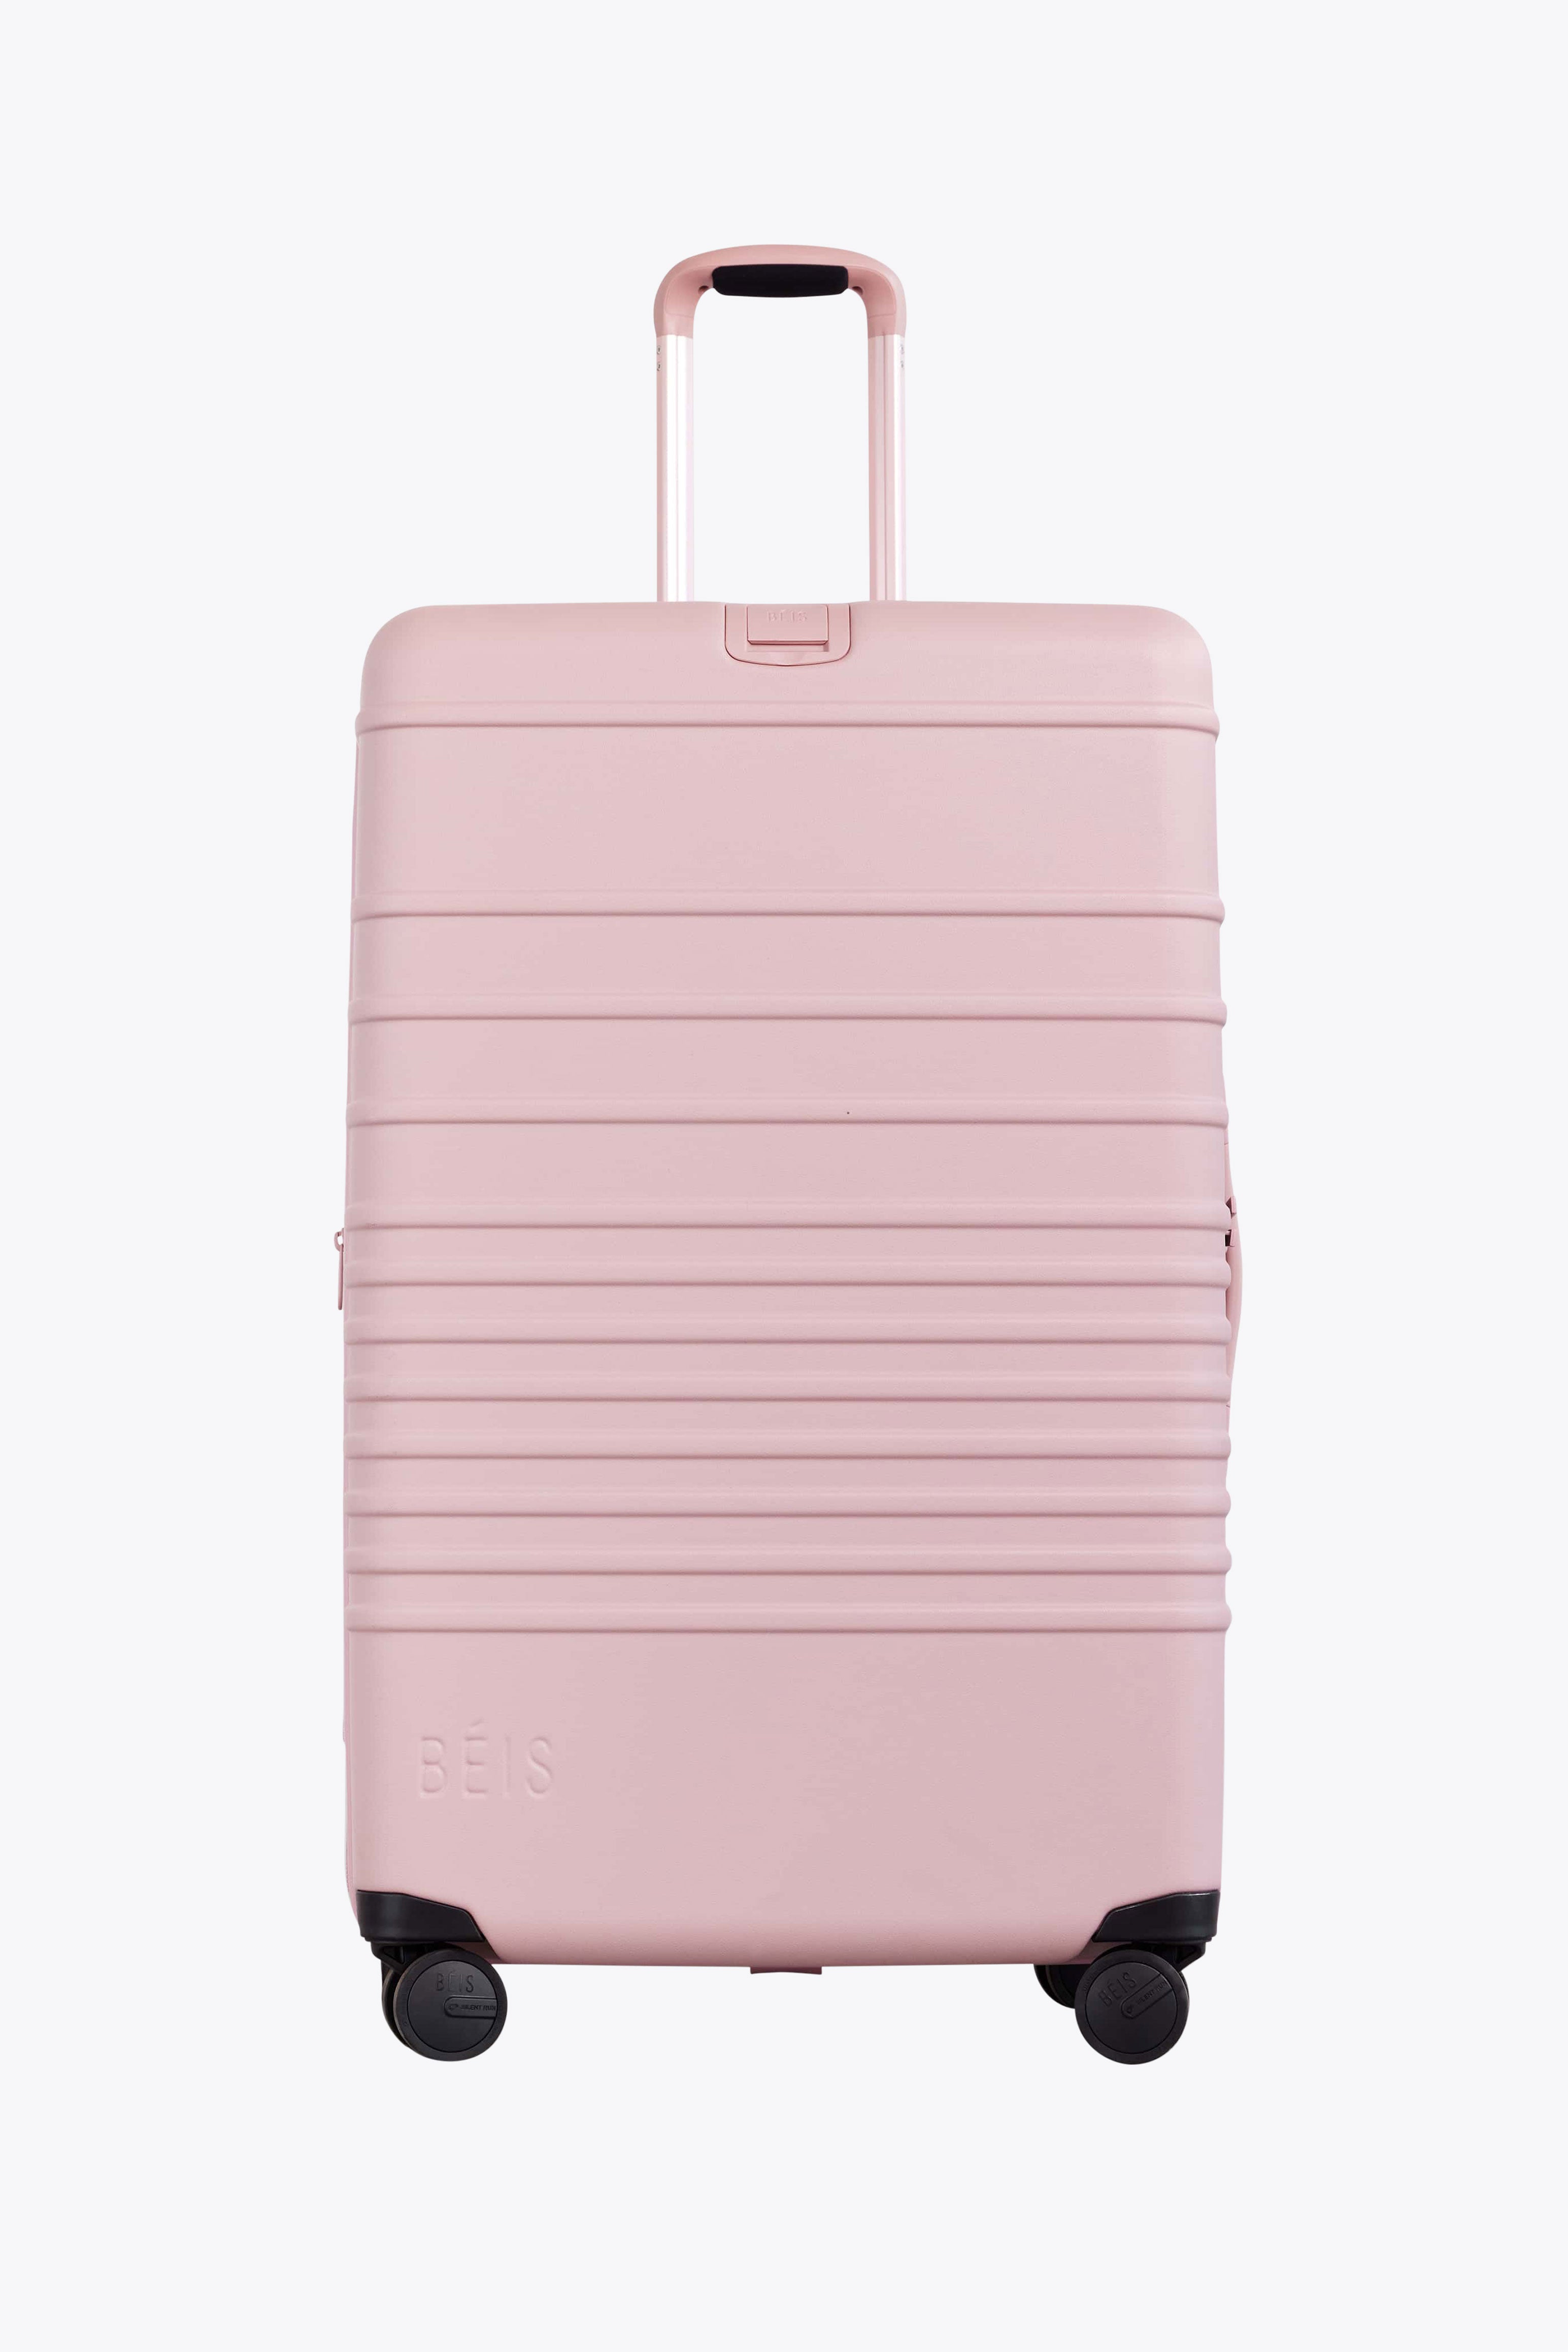 BÉIS 'The Backpack' in Atlas Pink - Pink Laptop Backpack For Work & Travel